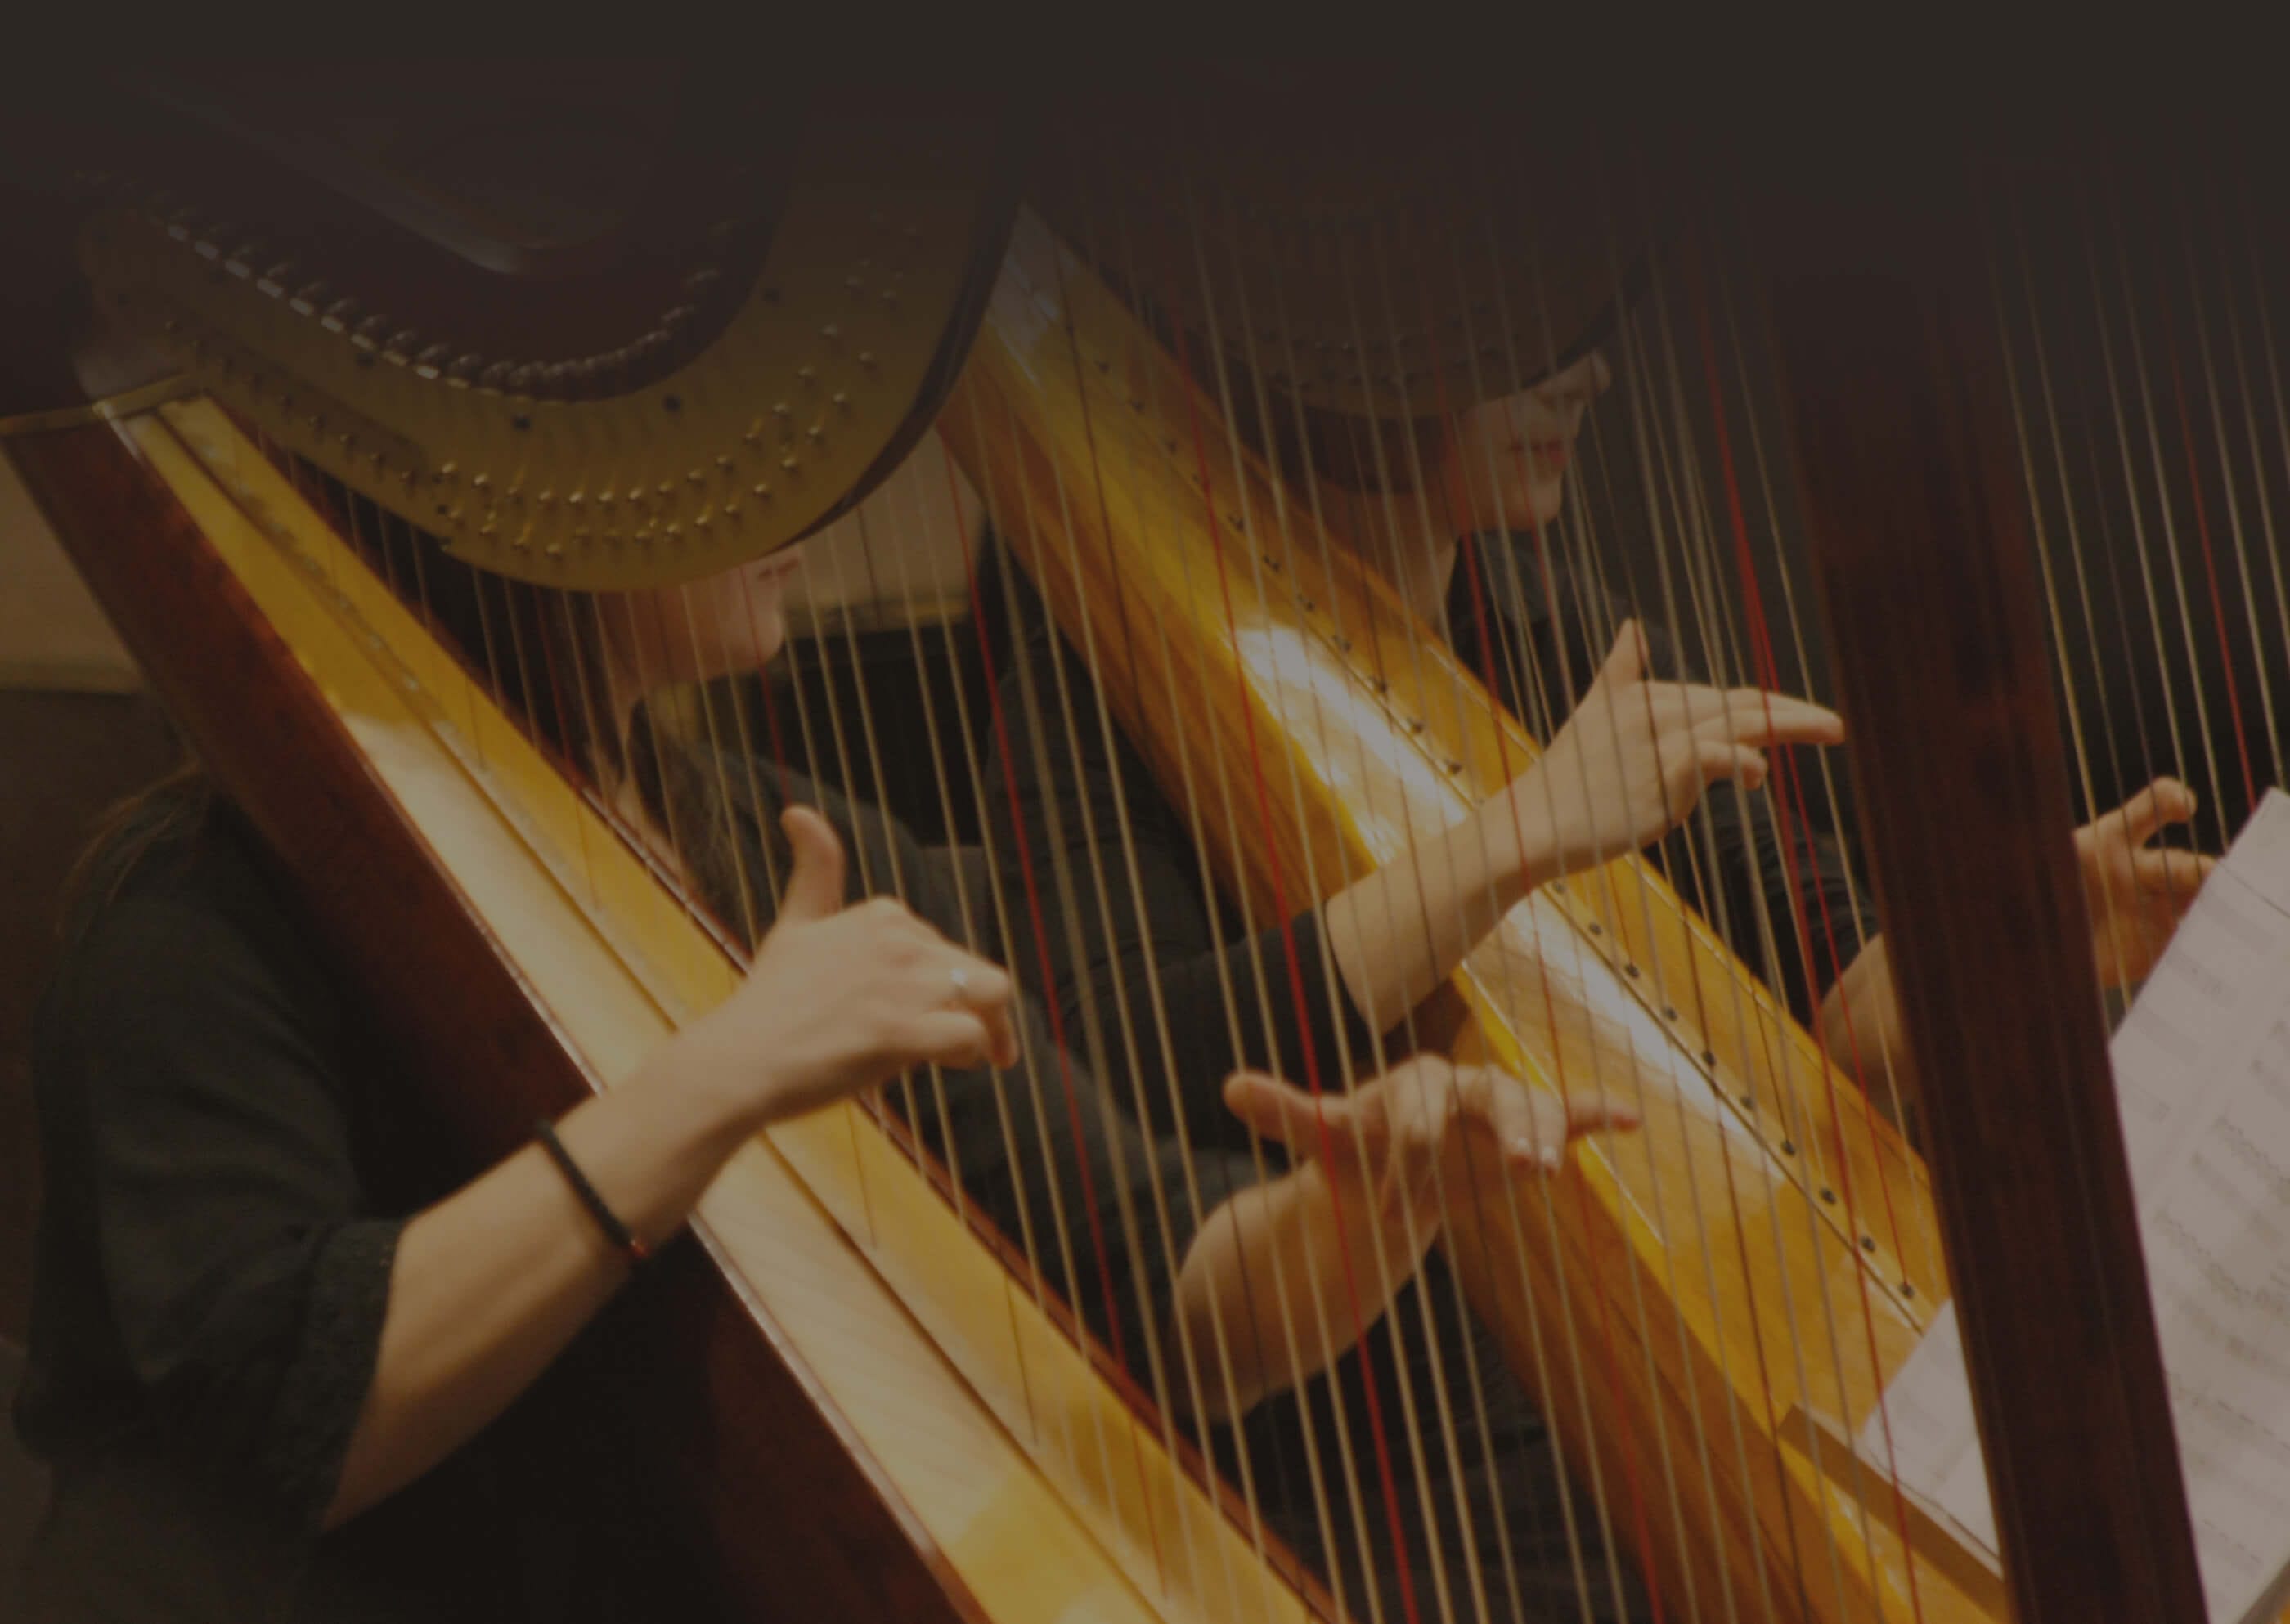 Harp music to Japanese culture